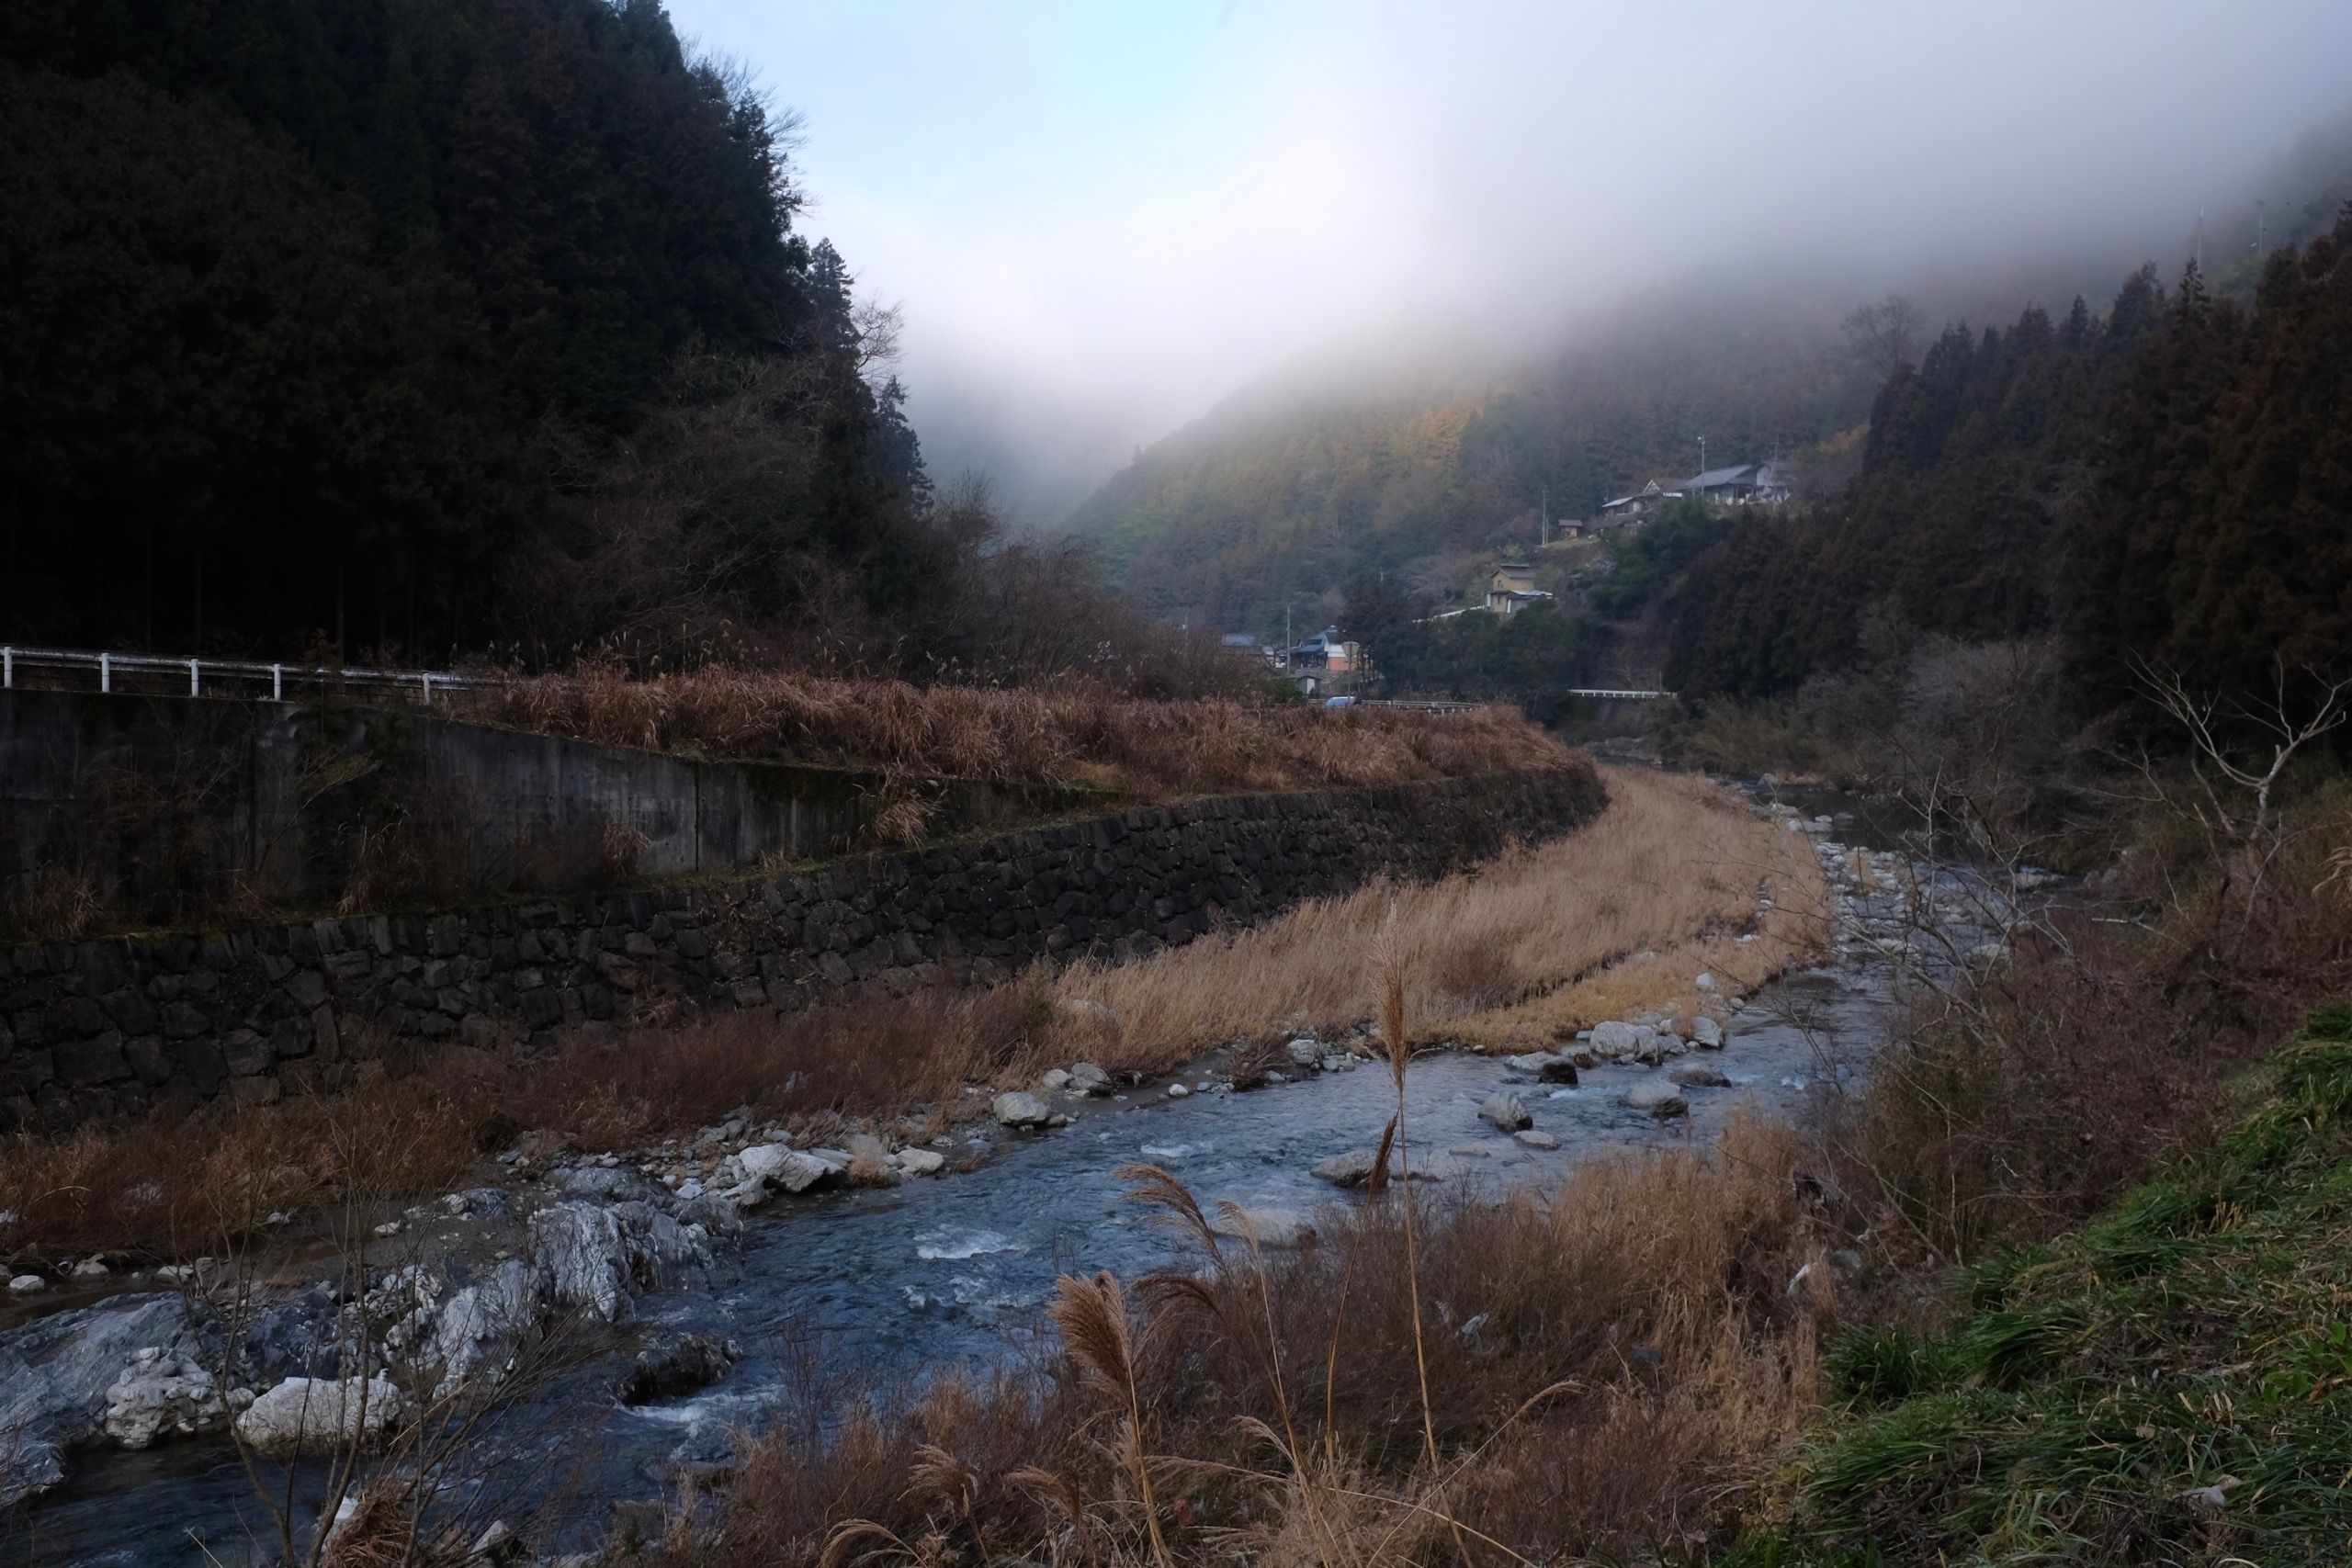 Fog lifts above a stream in a valley, with Japanese village houses on its banks in the distance.